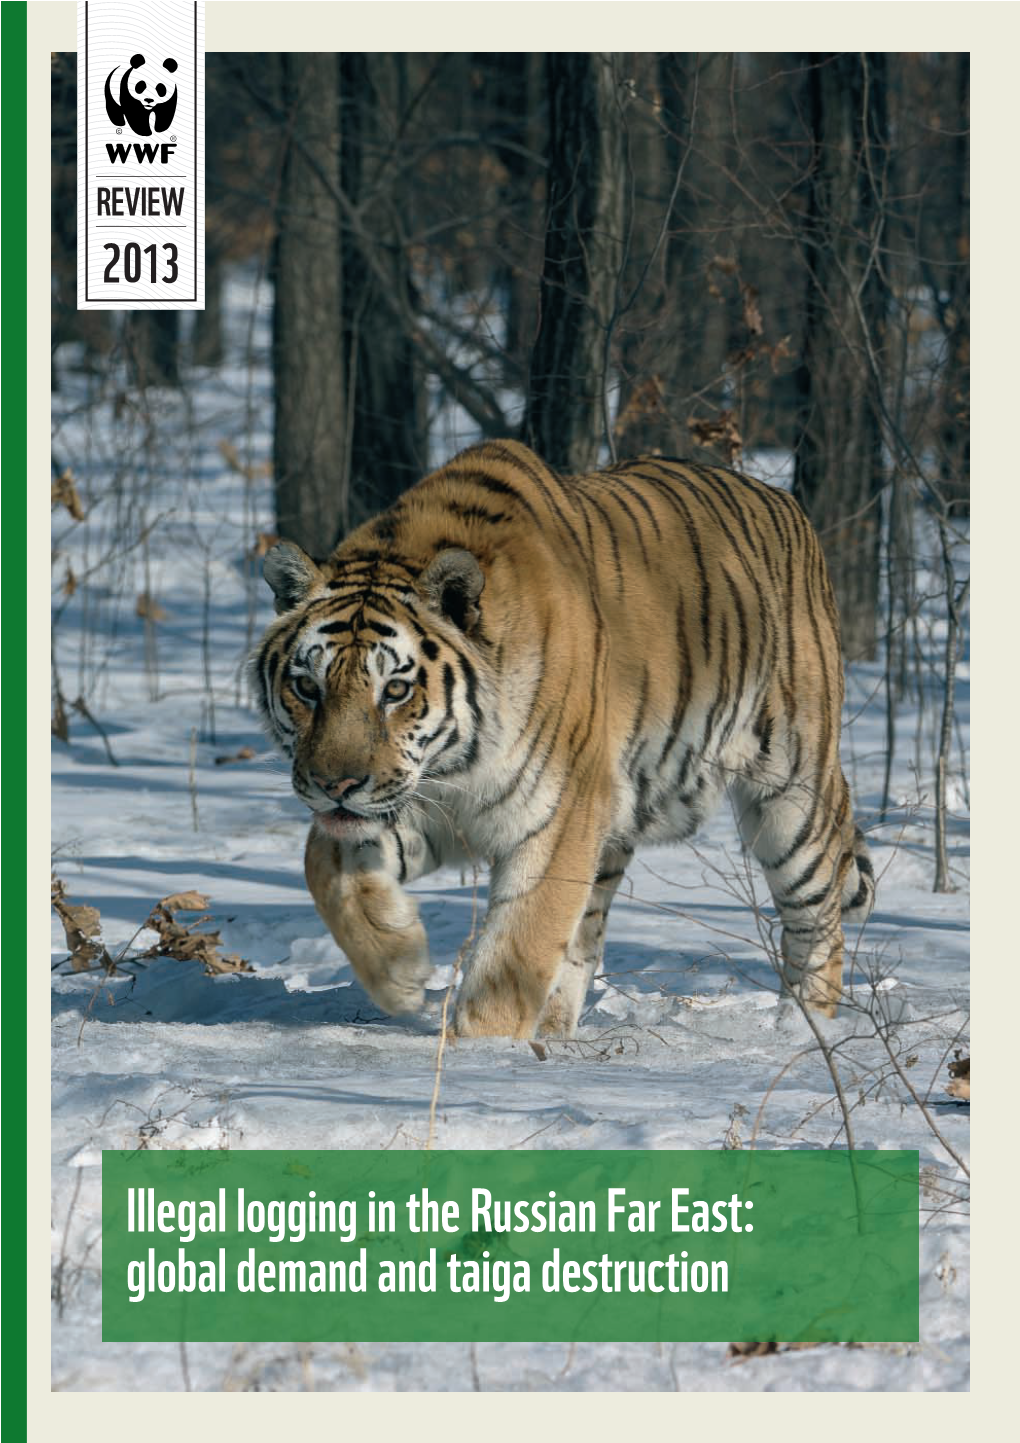 Illegal Logging in the Russian Far East: Global Demand and Taiga Destruction the Forest Program of WWF Russia